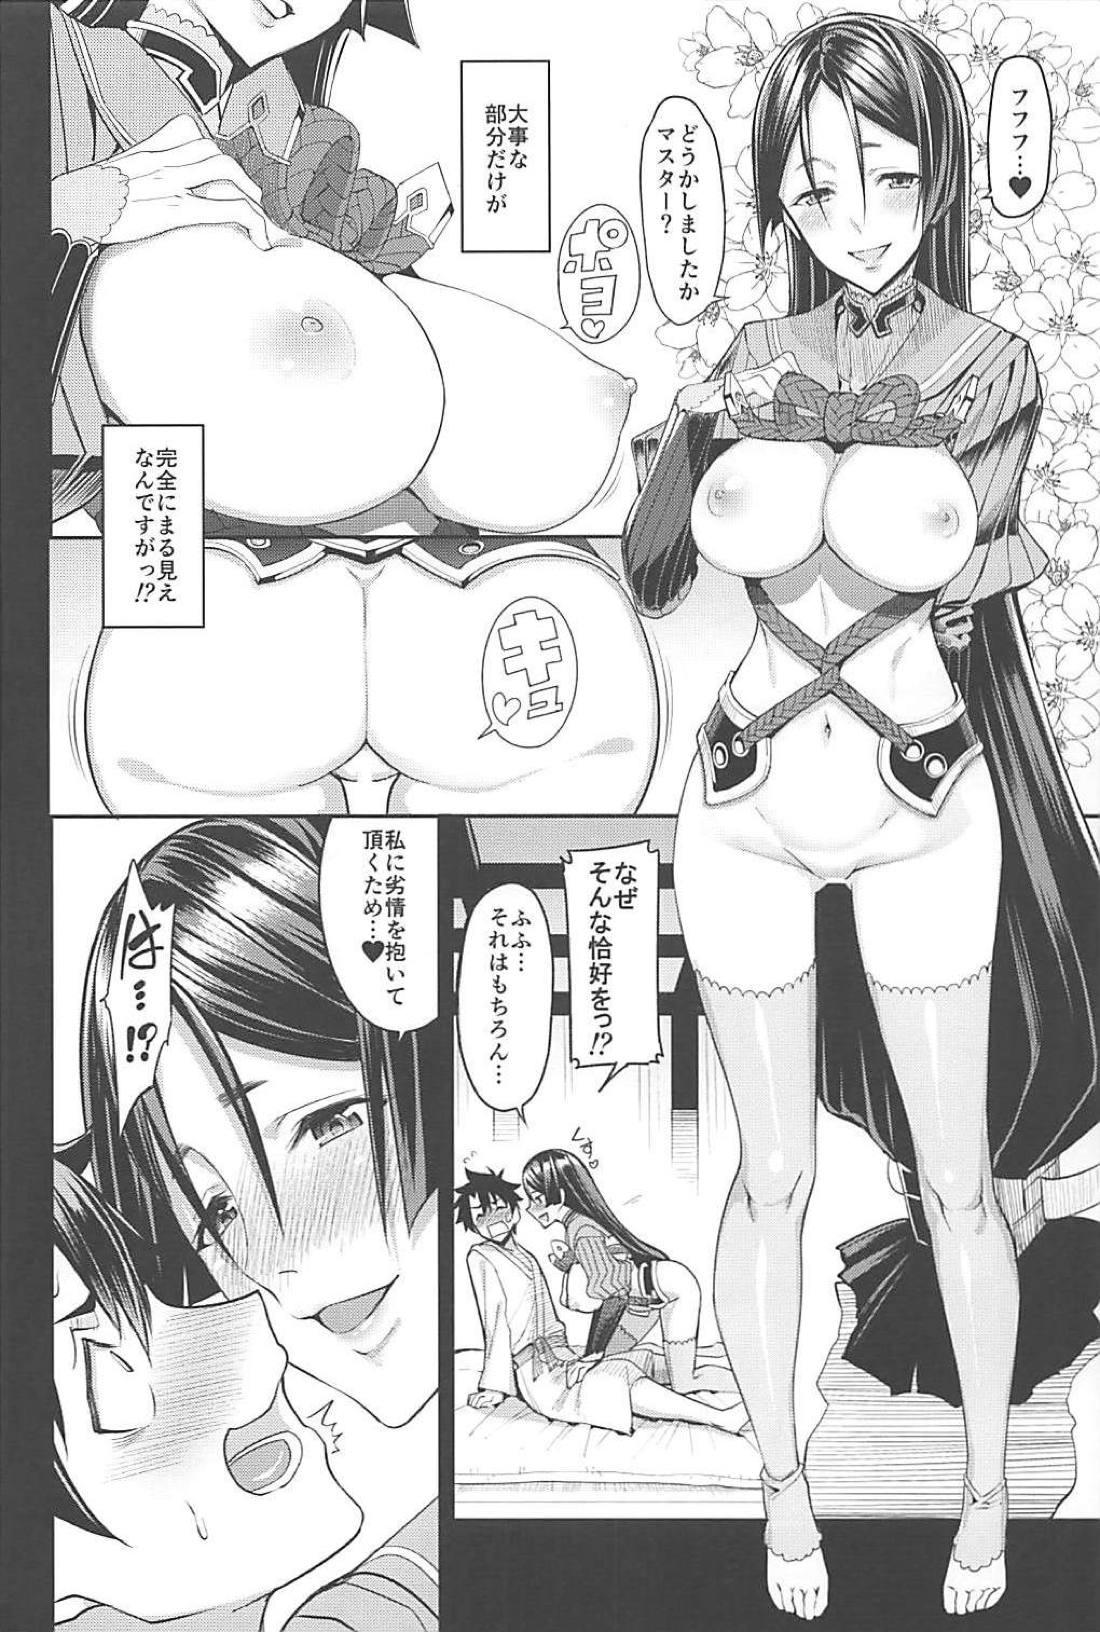 Old And Young Another Personality - Fate grand order Free Amateur Porn - Page 5